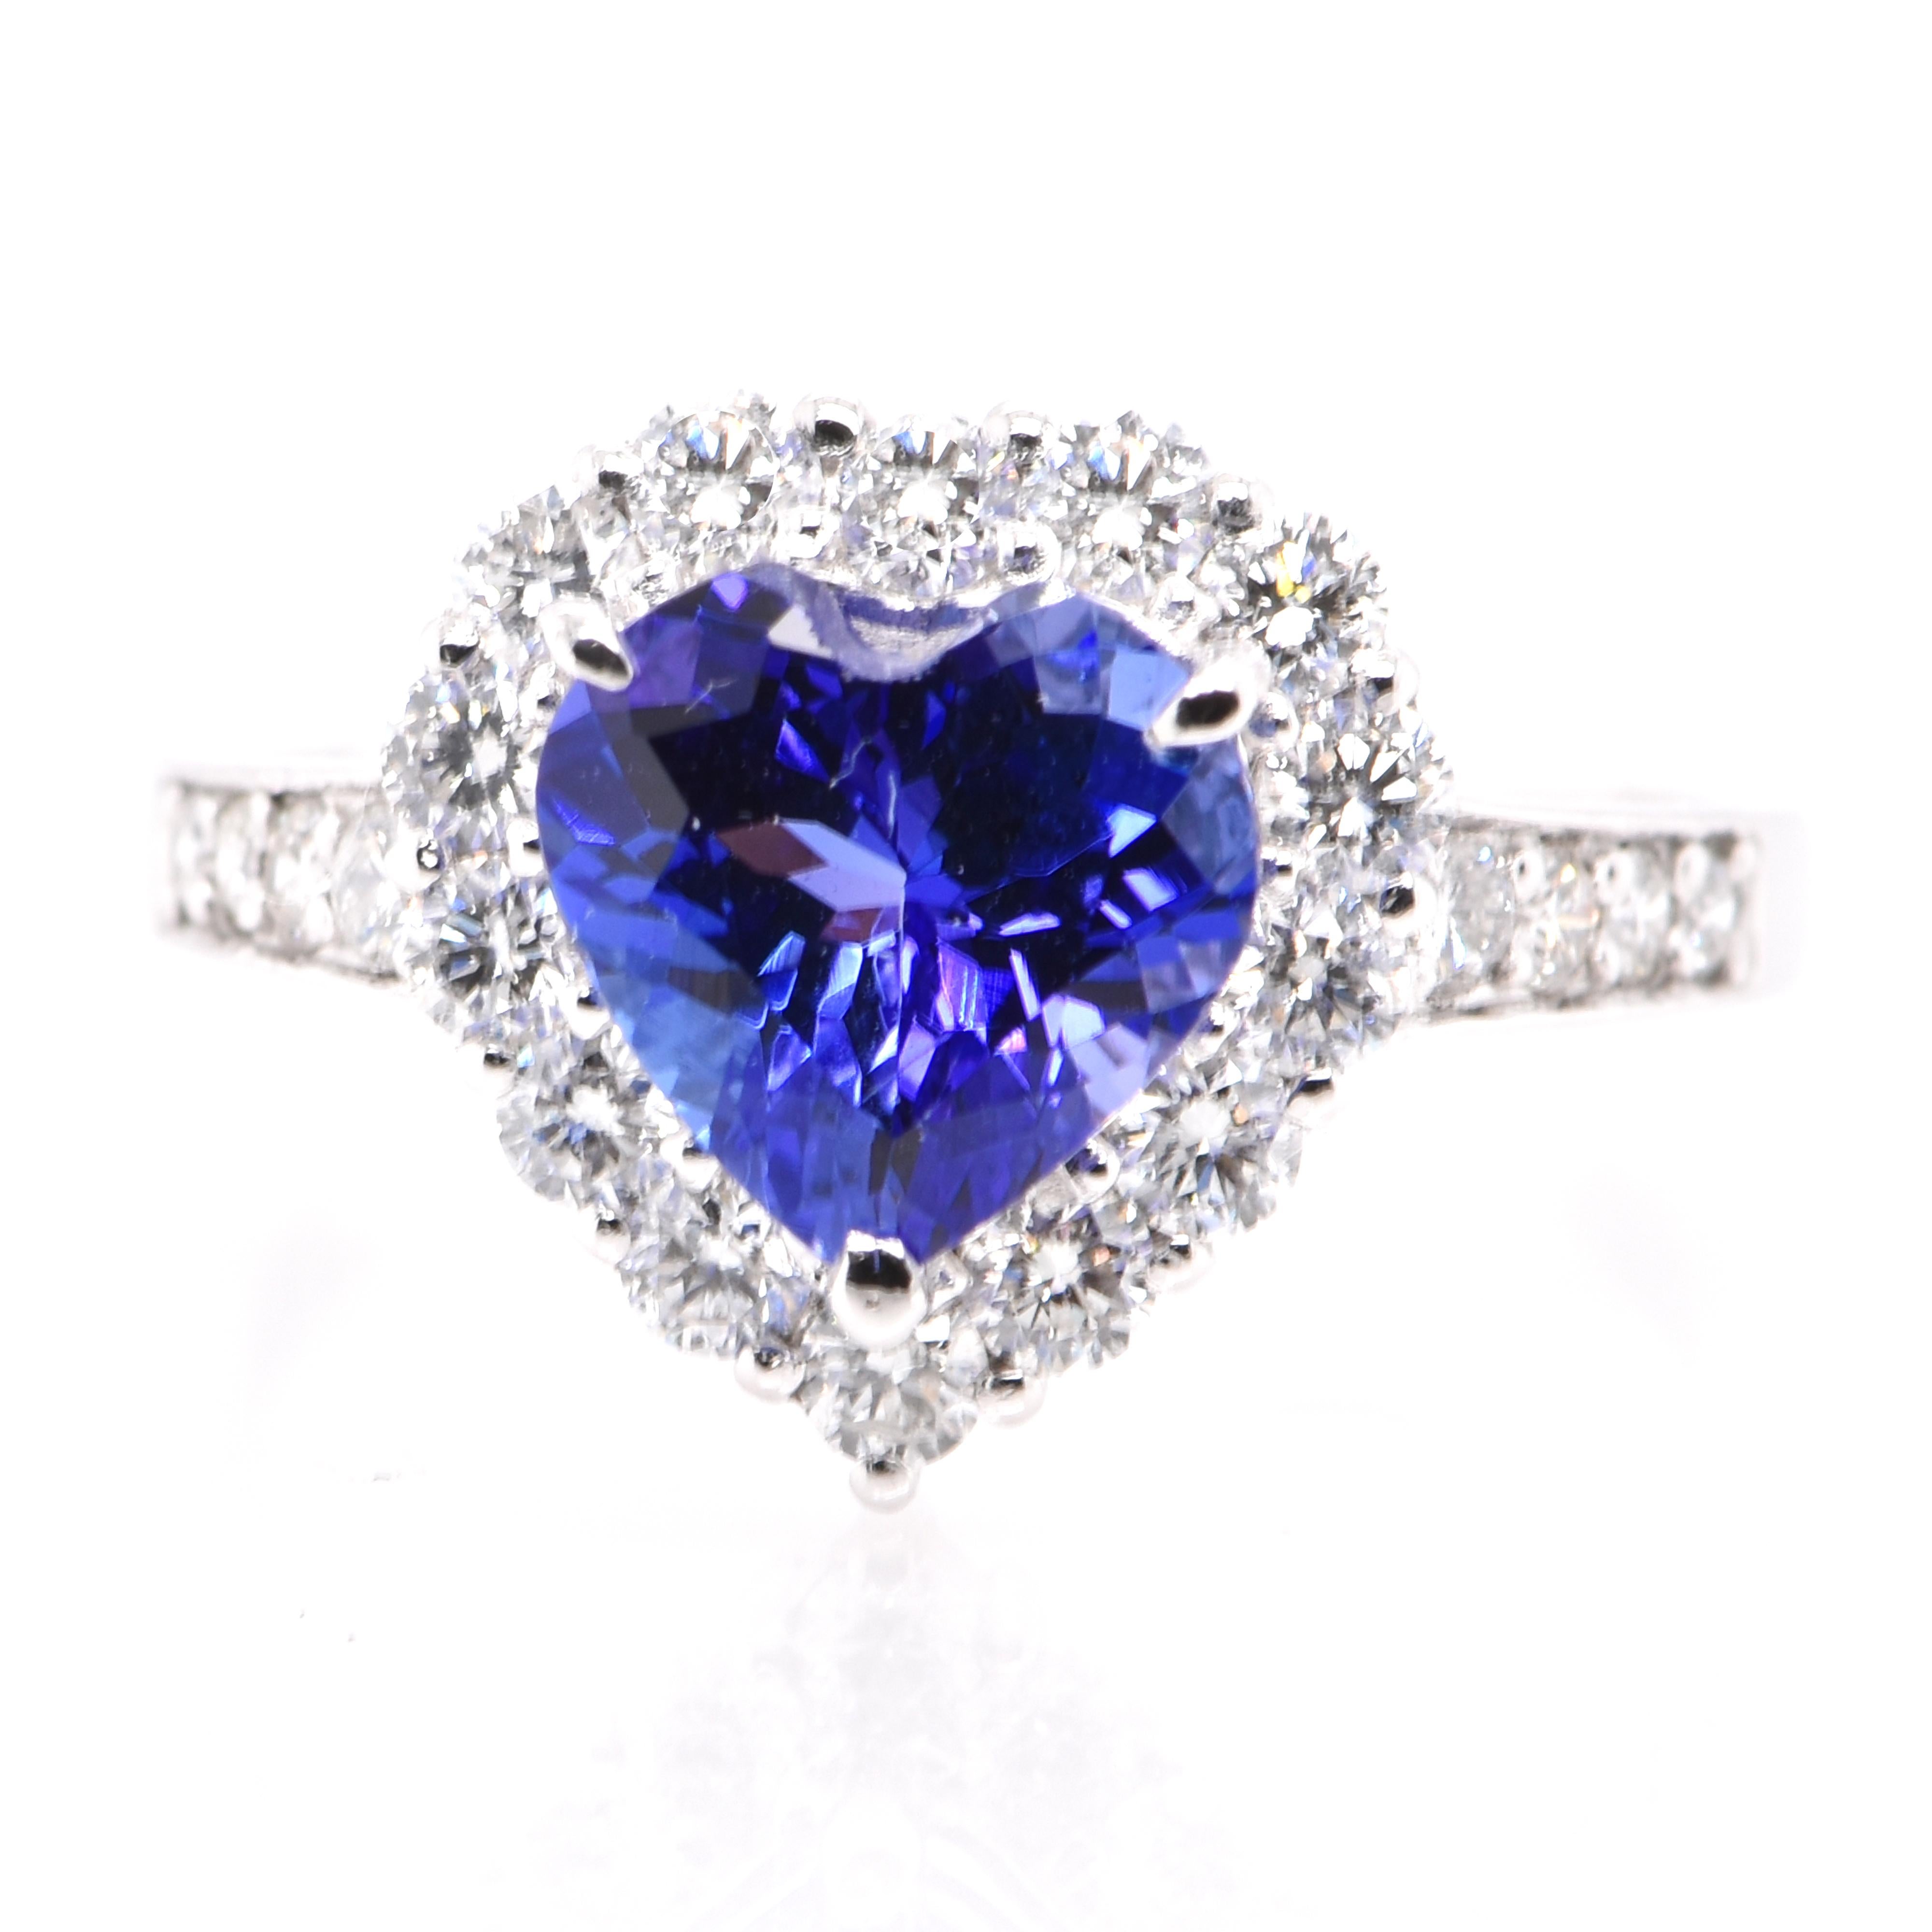 A beautiful ring featuring a 1.93 Carat Natural Tanzanite and 0.68 Carats of Diamond Accents set in Platinum. Tanzanite's name was given by Tiffany and Co after its only known source: Tanzania. Tanzanite displays beautiful pleochroic colors meaning